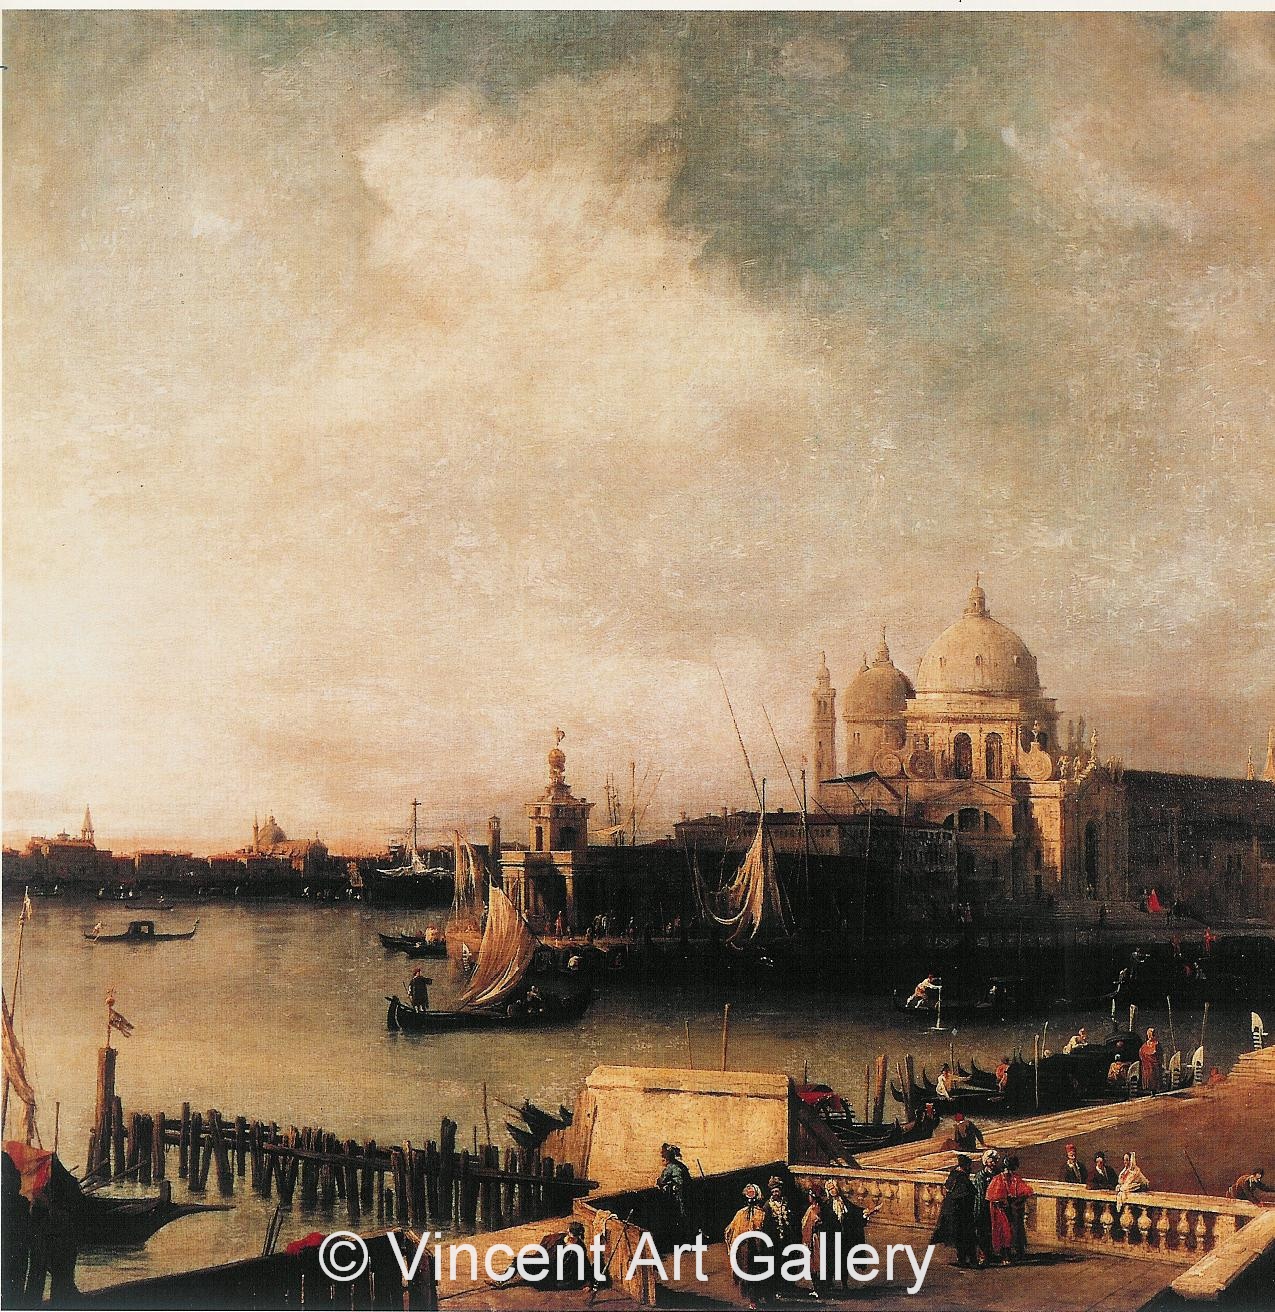 A1020, CANALETTO, Entrance to the Canal Grande